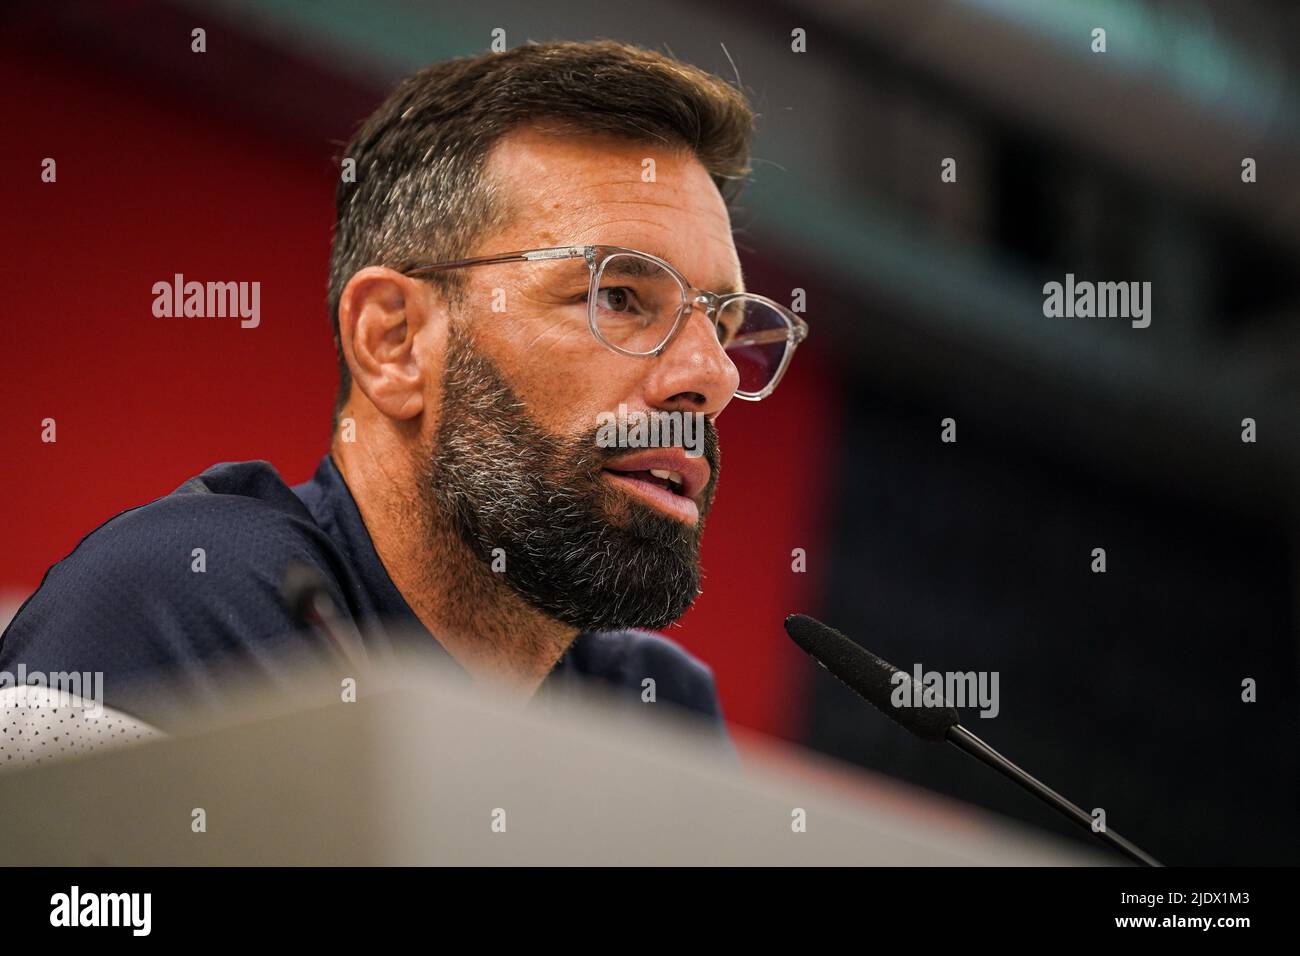 EINDHOVEN, NETHERLANDS - JUNE 20: Coach Ruud van Nistelrooij of PSV during  a press conference following the First Training Season 2022/2023 of PSV  Eindhoven at PSV Campus De Herdgang on June 20,